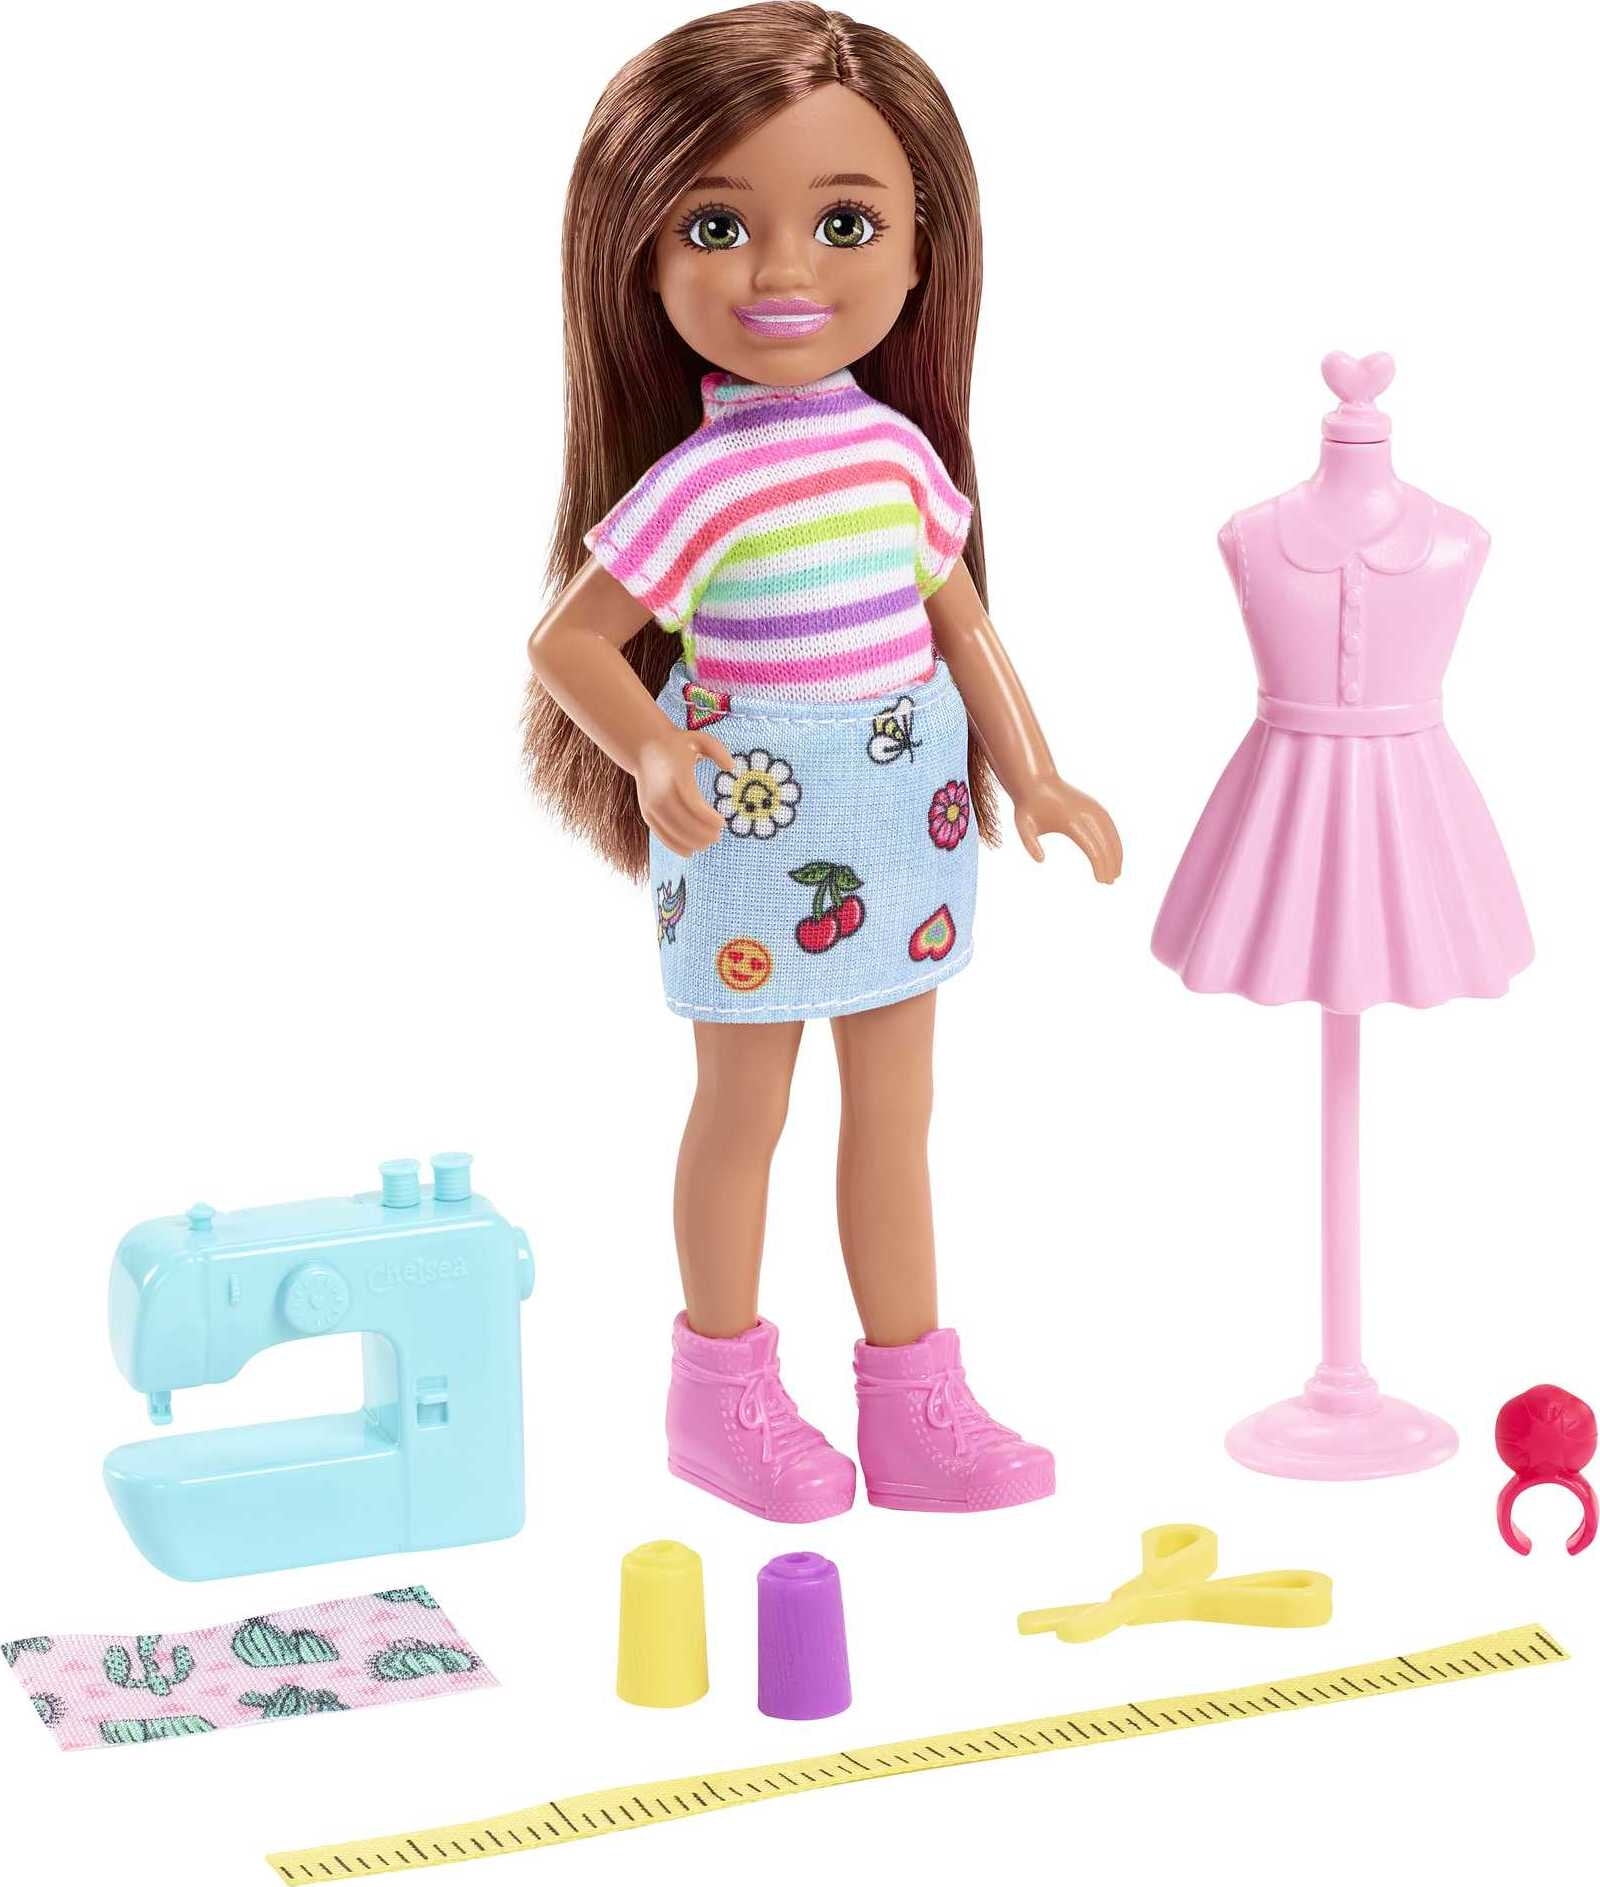 Mattel - Barbie Chelsea Career Accessory Doll 2 - Toddler toy